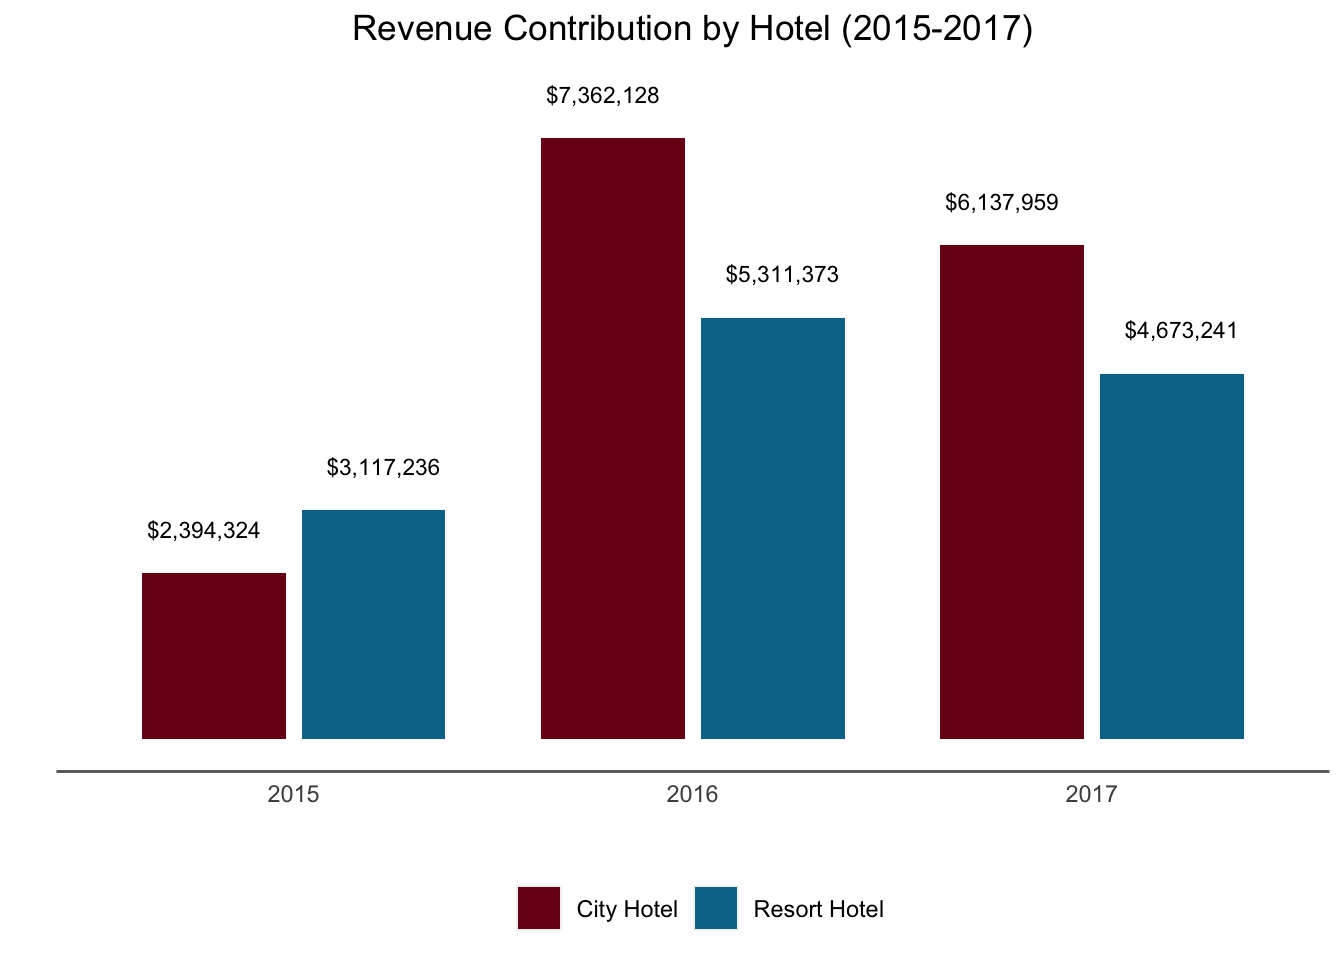 Summary: Both the City and Resort Hotel have demonstrated revenue growth, but the City Hotel has grown much more. While revenue was similar in 2015, in 2016 and 2017, the City Revenue brought in far more revenue than the Resort Hotel